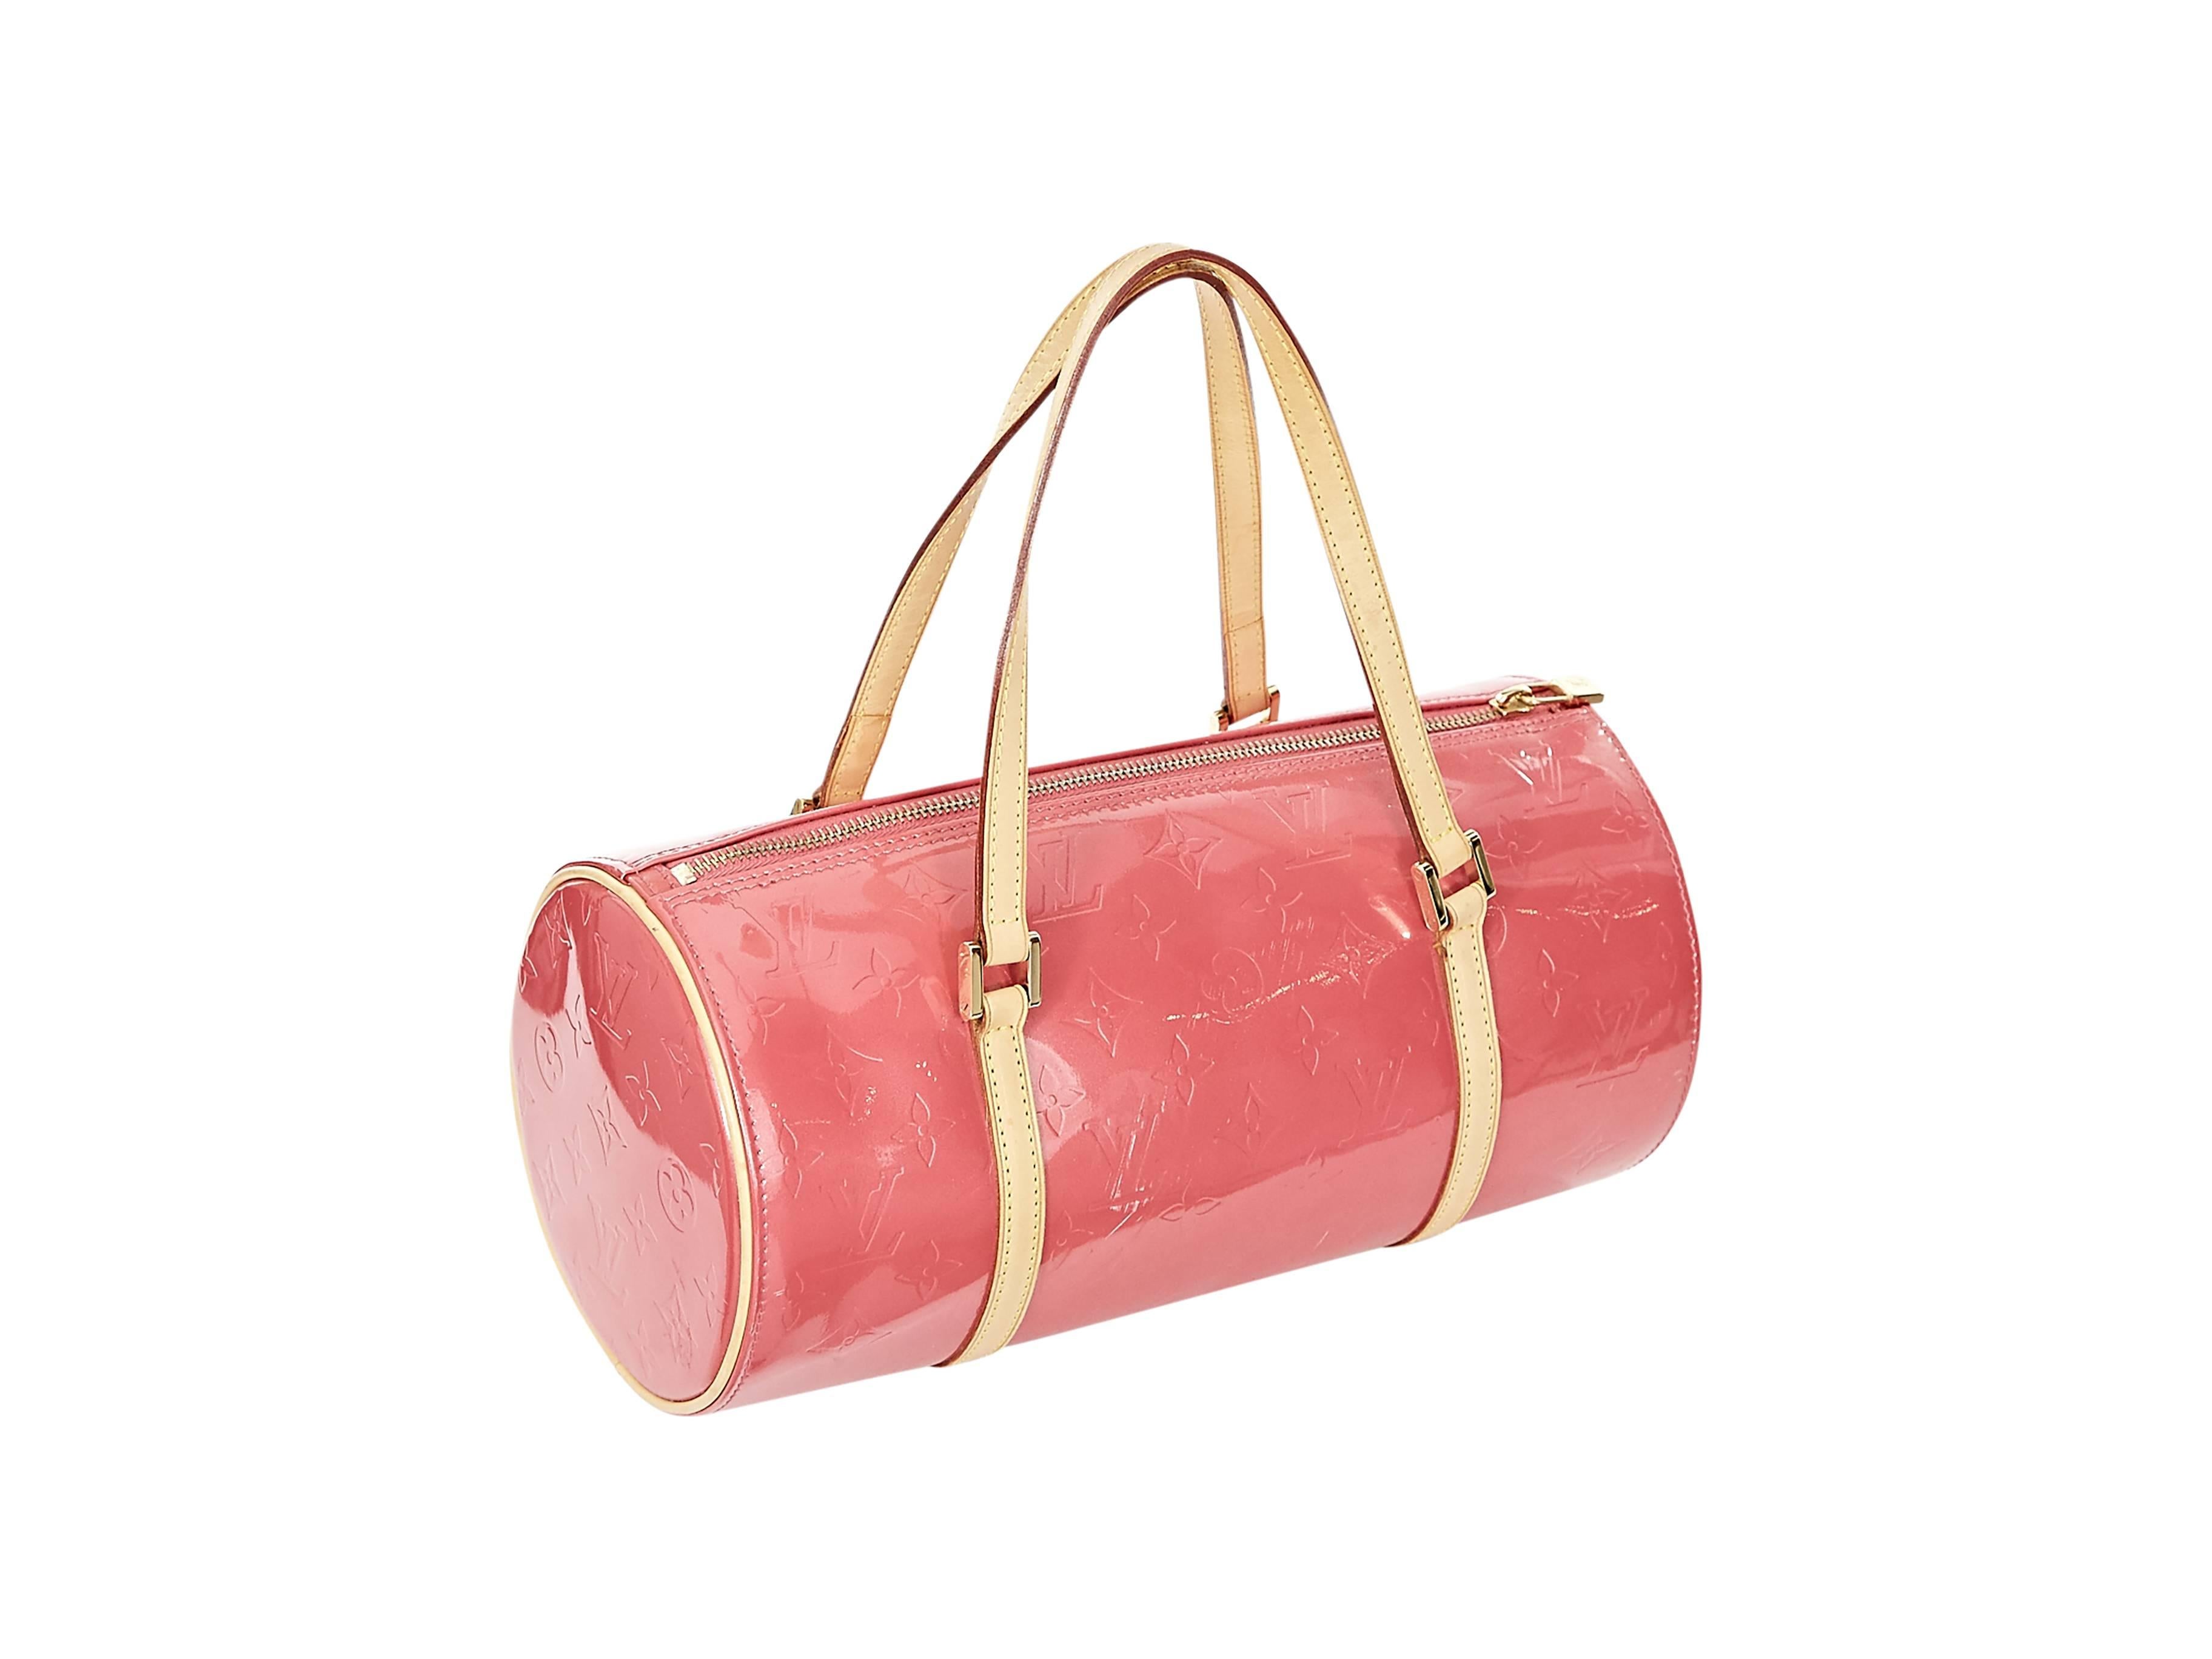 Pink patent leather monogrammed barrel 'Papillon' by Louis Vuitton.  Tan leather shoulder straps.  Top zip closure with lock.  Goldtone hardware. Handle Drop 6”, Height 6”, Width 12”, Depth 5.5”